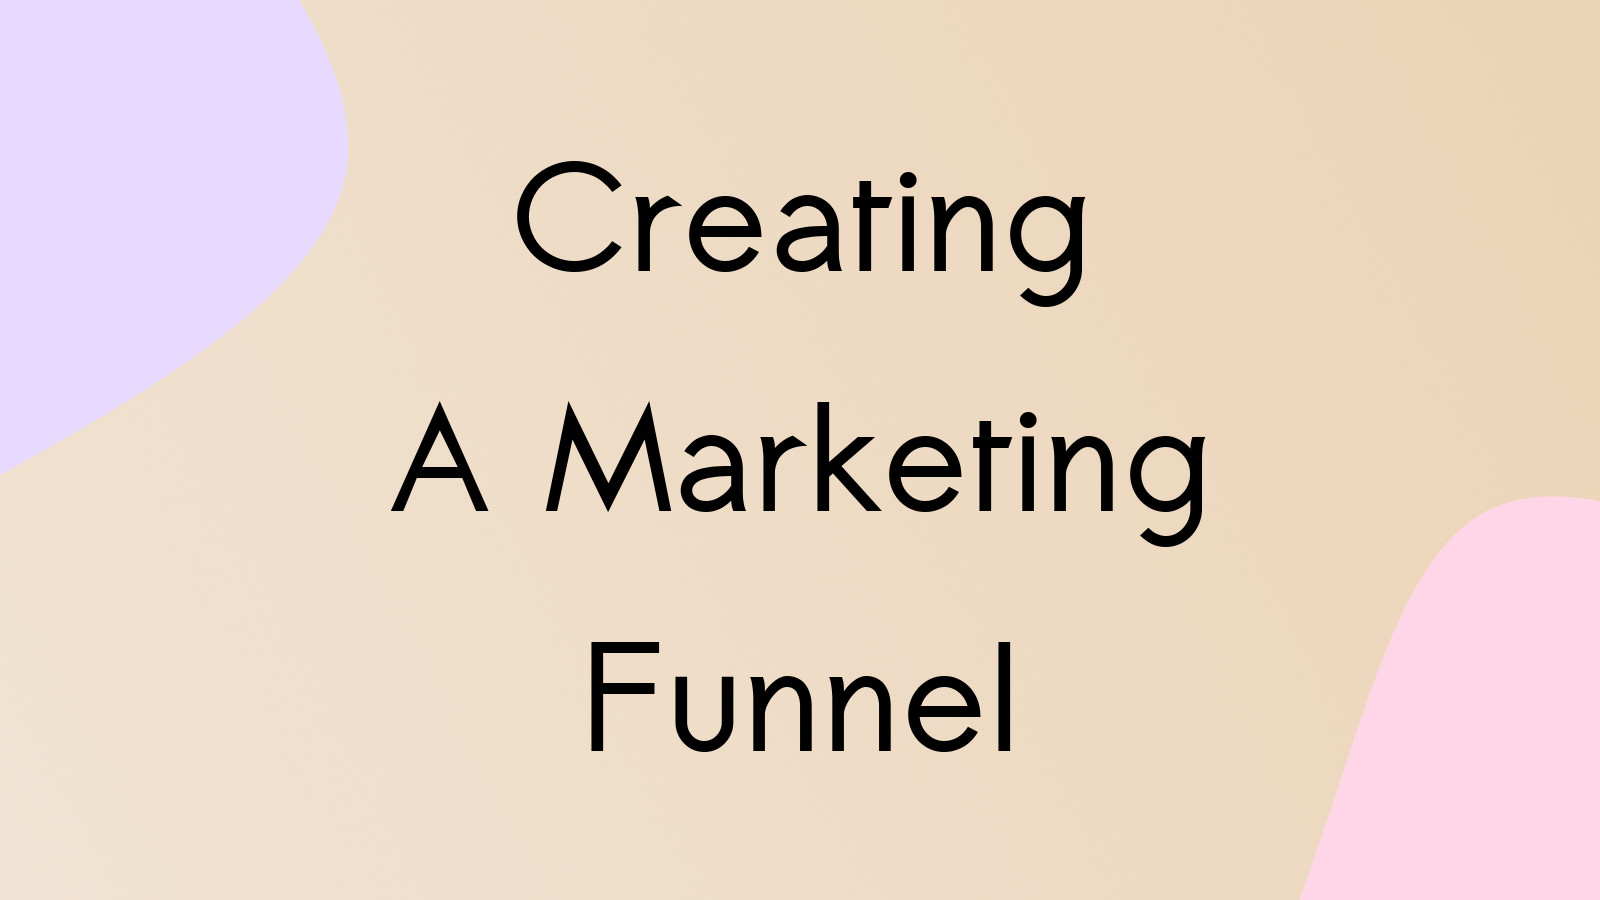 Creating a Marketing Funnel